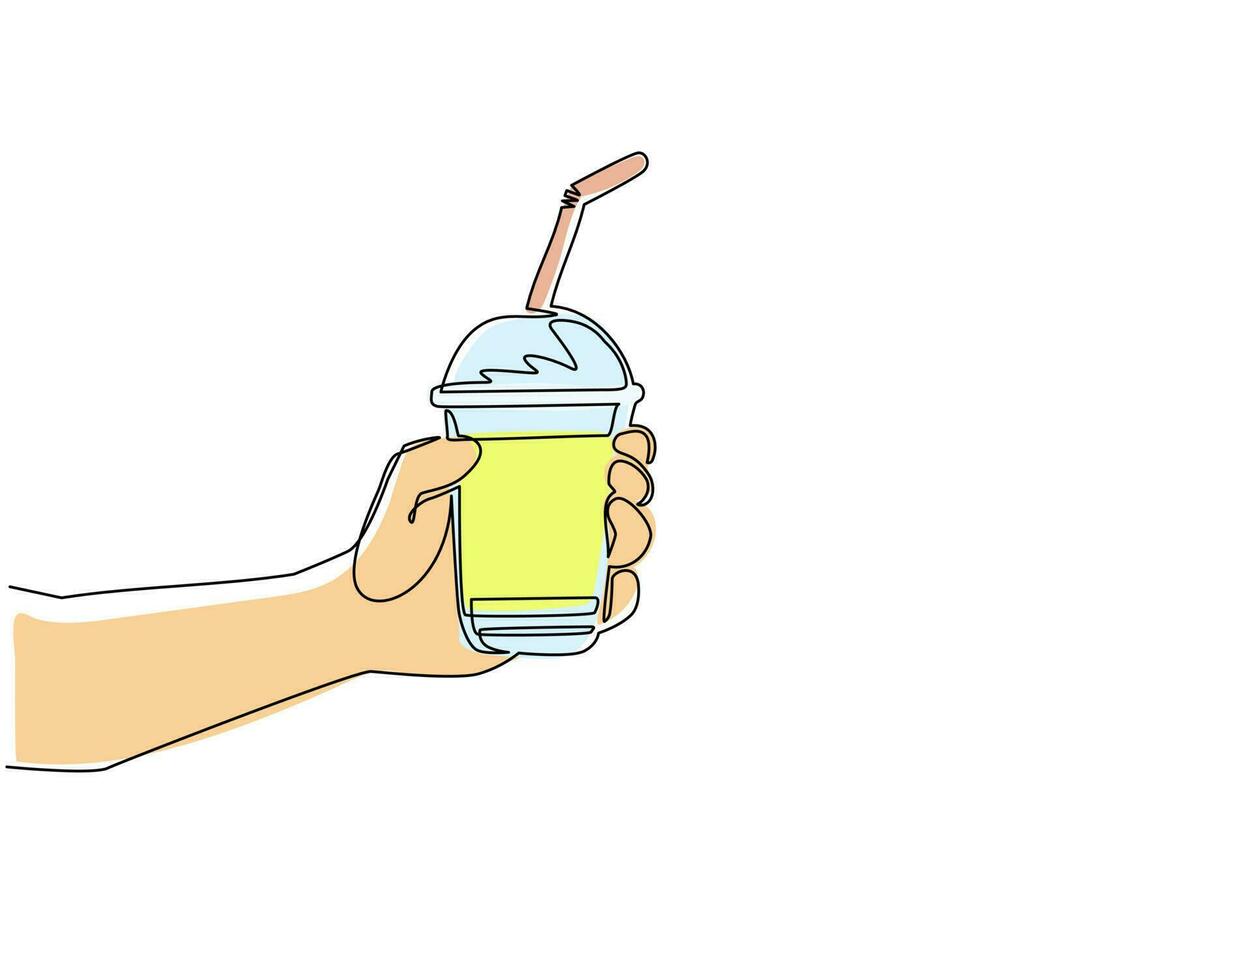 Continuous one line drawing hand holding bubble tea cup. Boba tea, sweet Taiwanese drink popular in Asia. Flat cartoon style, elements are isolated. Single line draw design vector graphic illustration